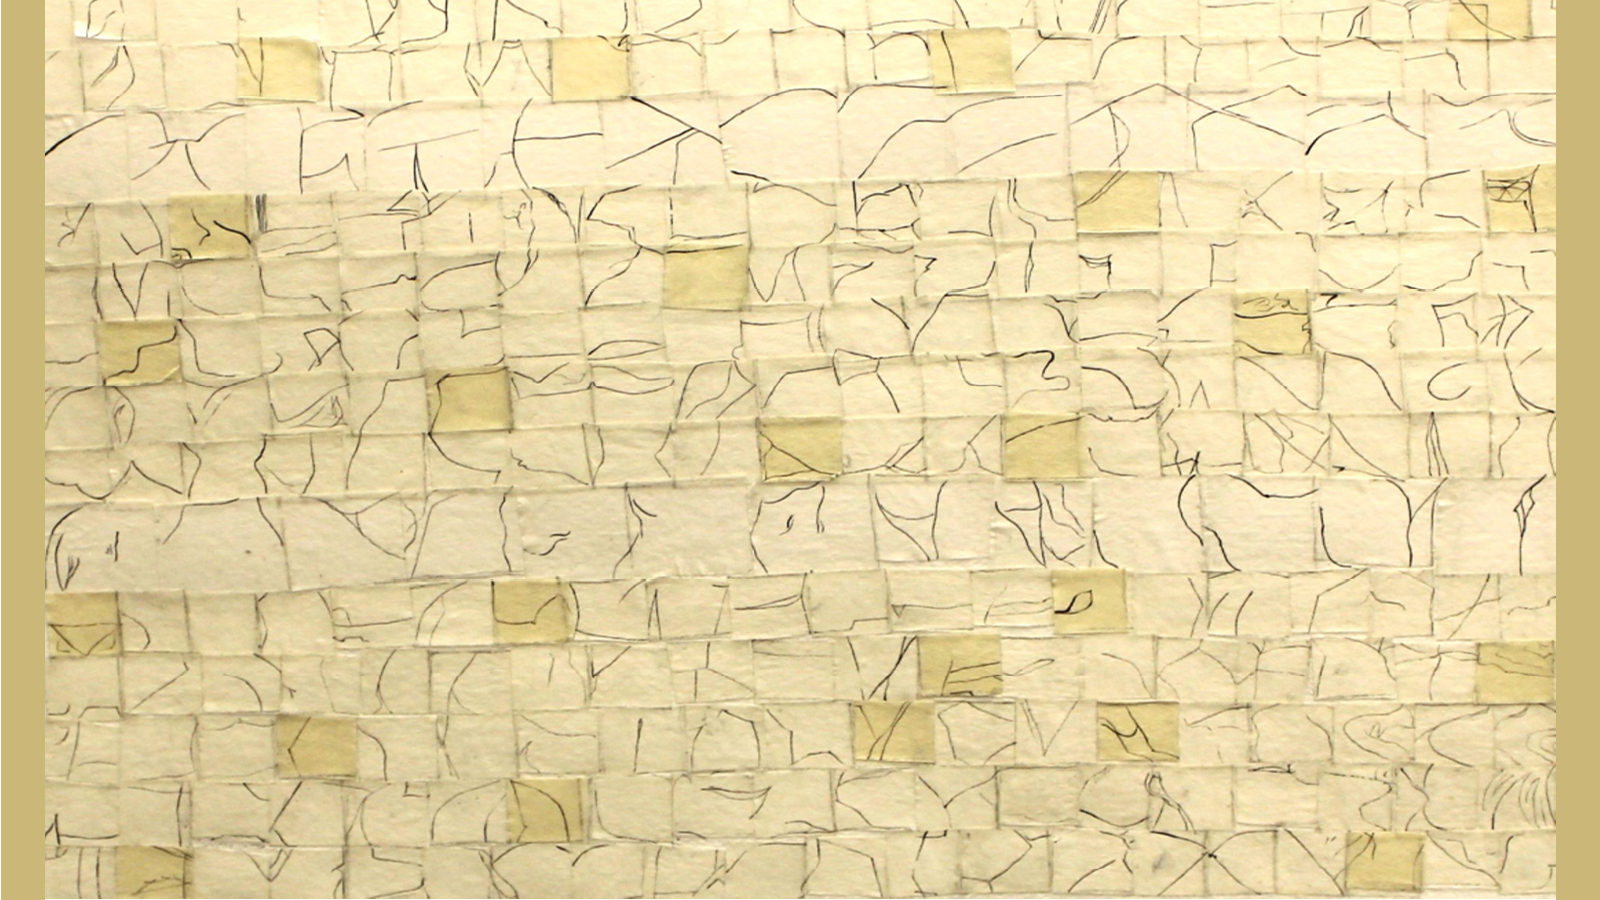 Riddhi Patel, details from Crevices within: Small tapped white and yellow squares arranged next to each other in the form of a grid on a paper which show a range of angular and directional marks in black ink within each square.